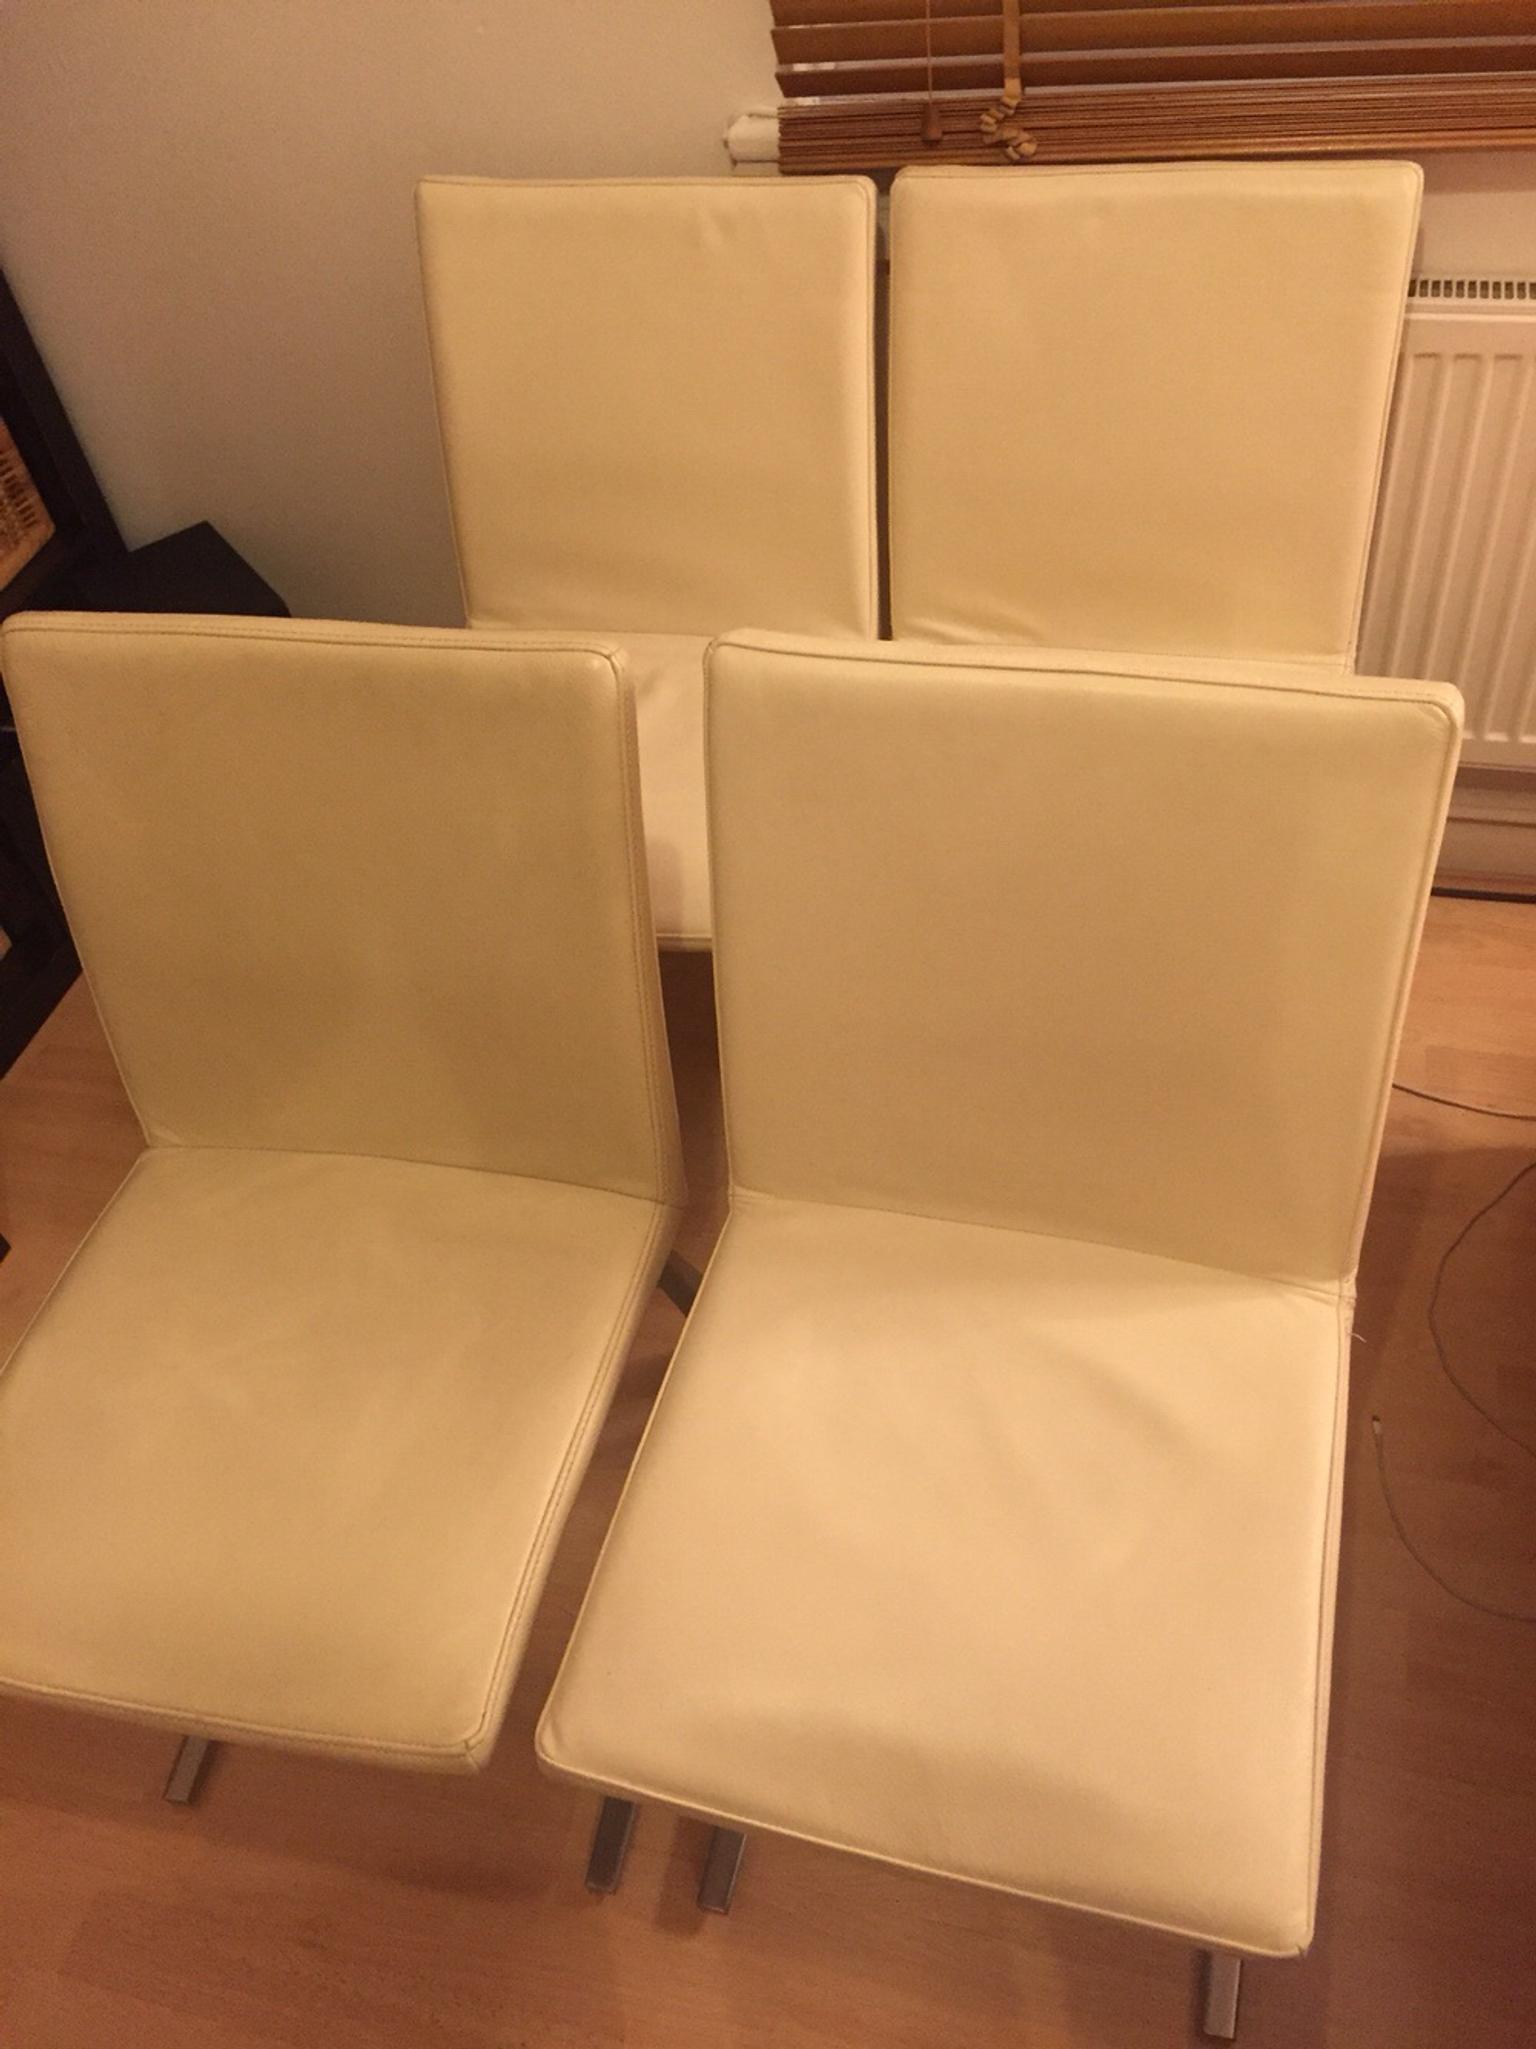 4 X Boconcept Mariposa Dining Chairs In W5 London For 380 00 For